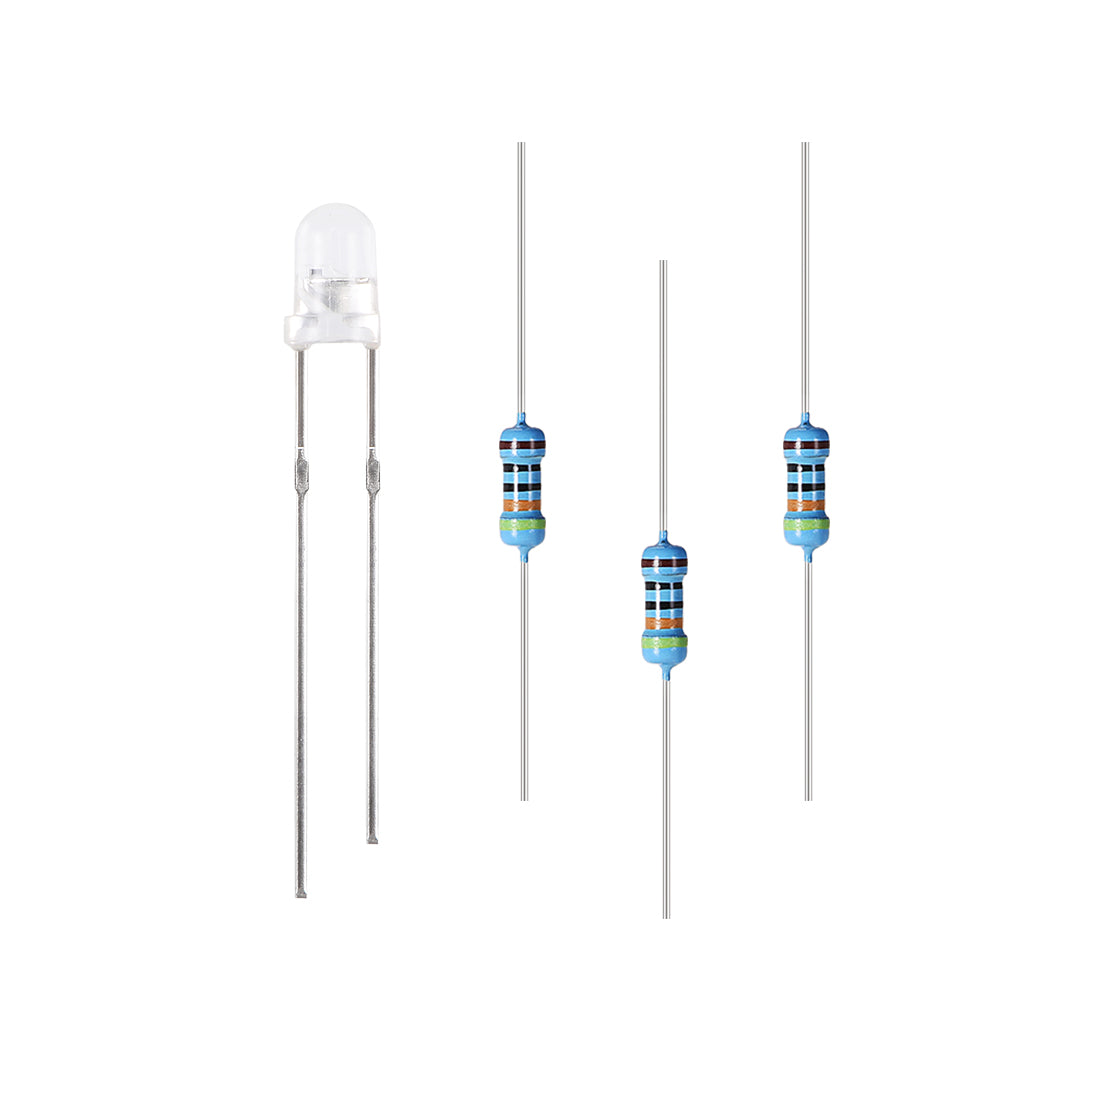 uxcell Uxcell 100Set 3mm LED Diodes Kit Clear Flashing Red Super Bright 19mm Pin W Resistors